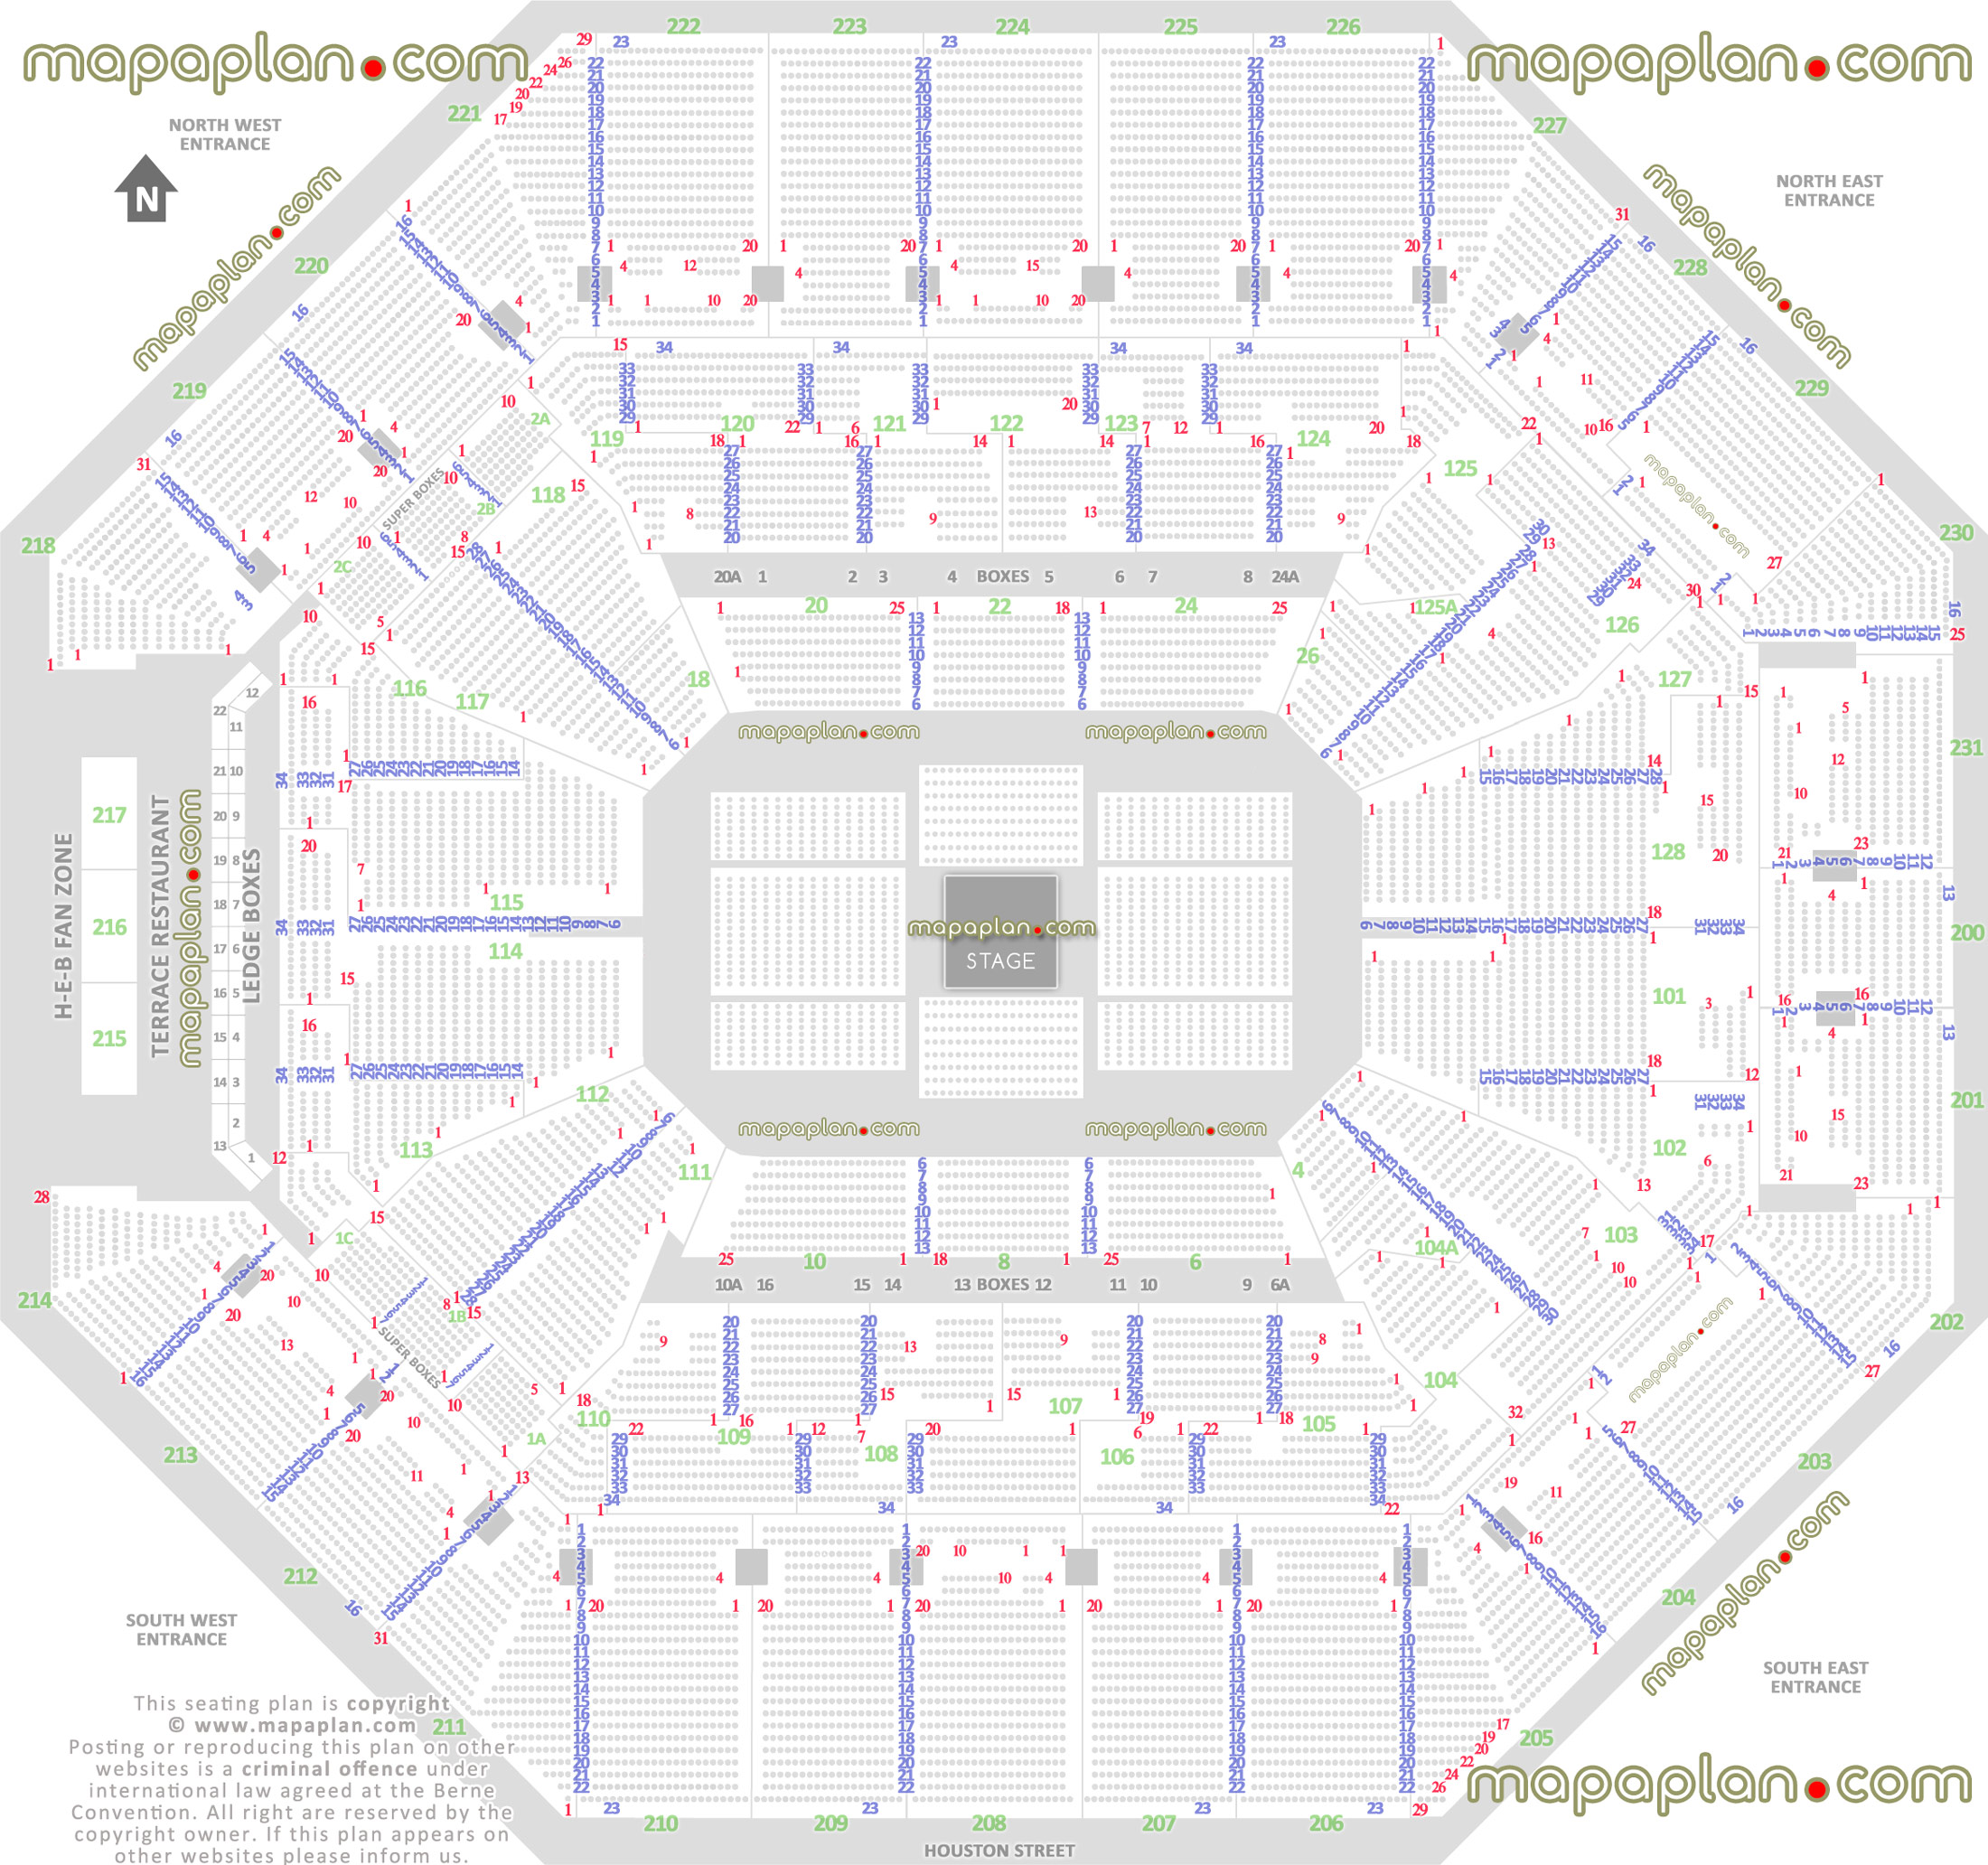 concert stage round 360 degree arrangement how many seats row balcony sections 201 202 203 204 205 206 207 208 209 210 211 212 213 214 215 216 217 218 219 220 221 222 223 224 225 226 227 228 229 230 San Antonio Frost Bank Center seating chart